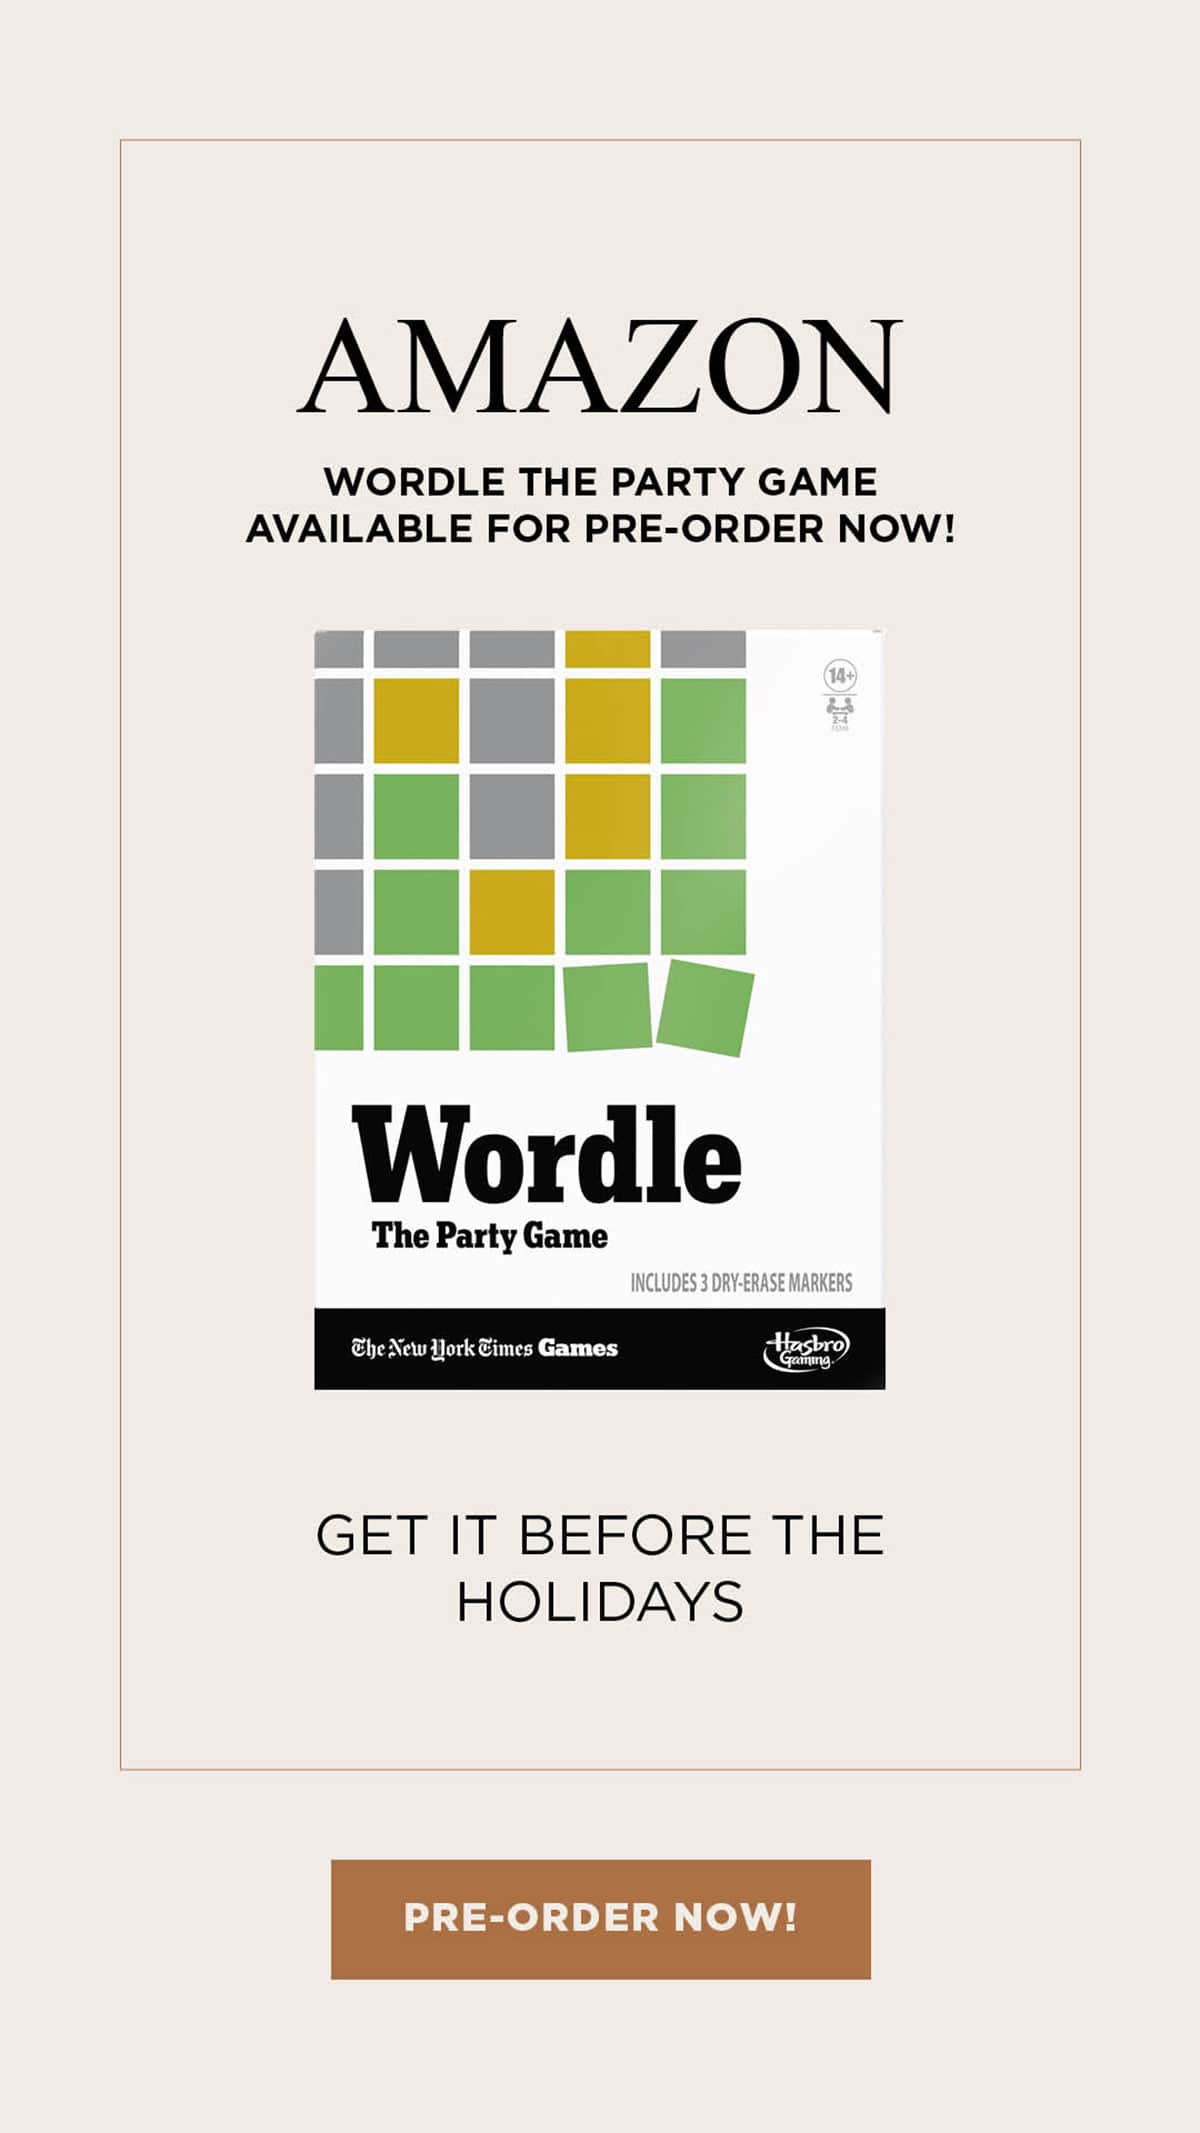 Pre-order wordle on Amazon before the holidays!